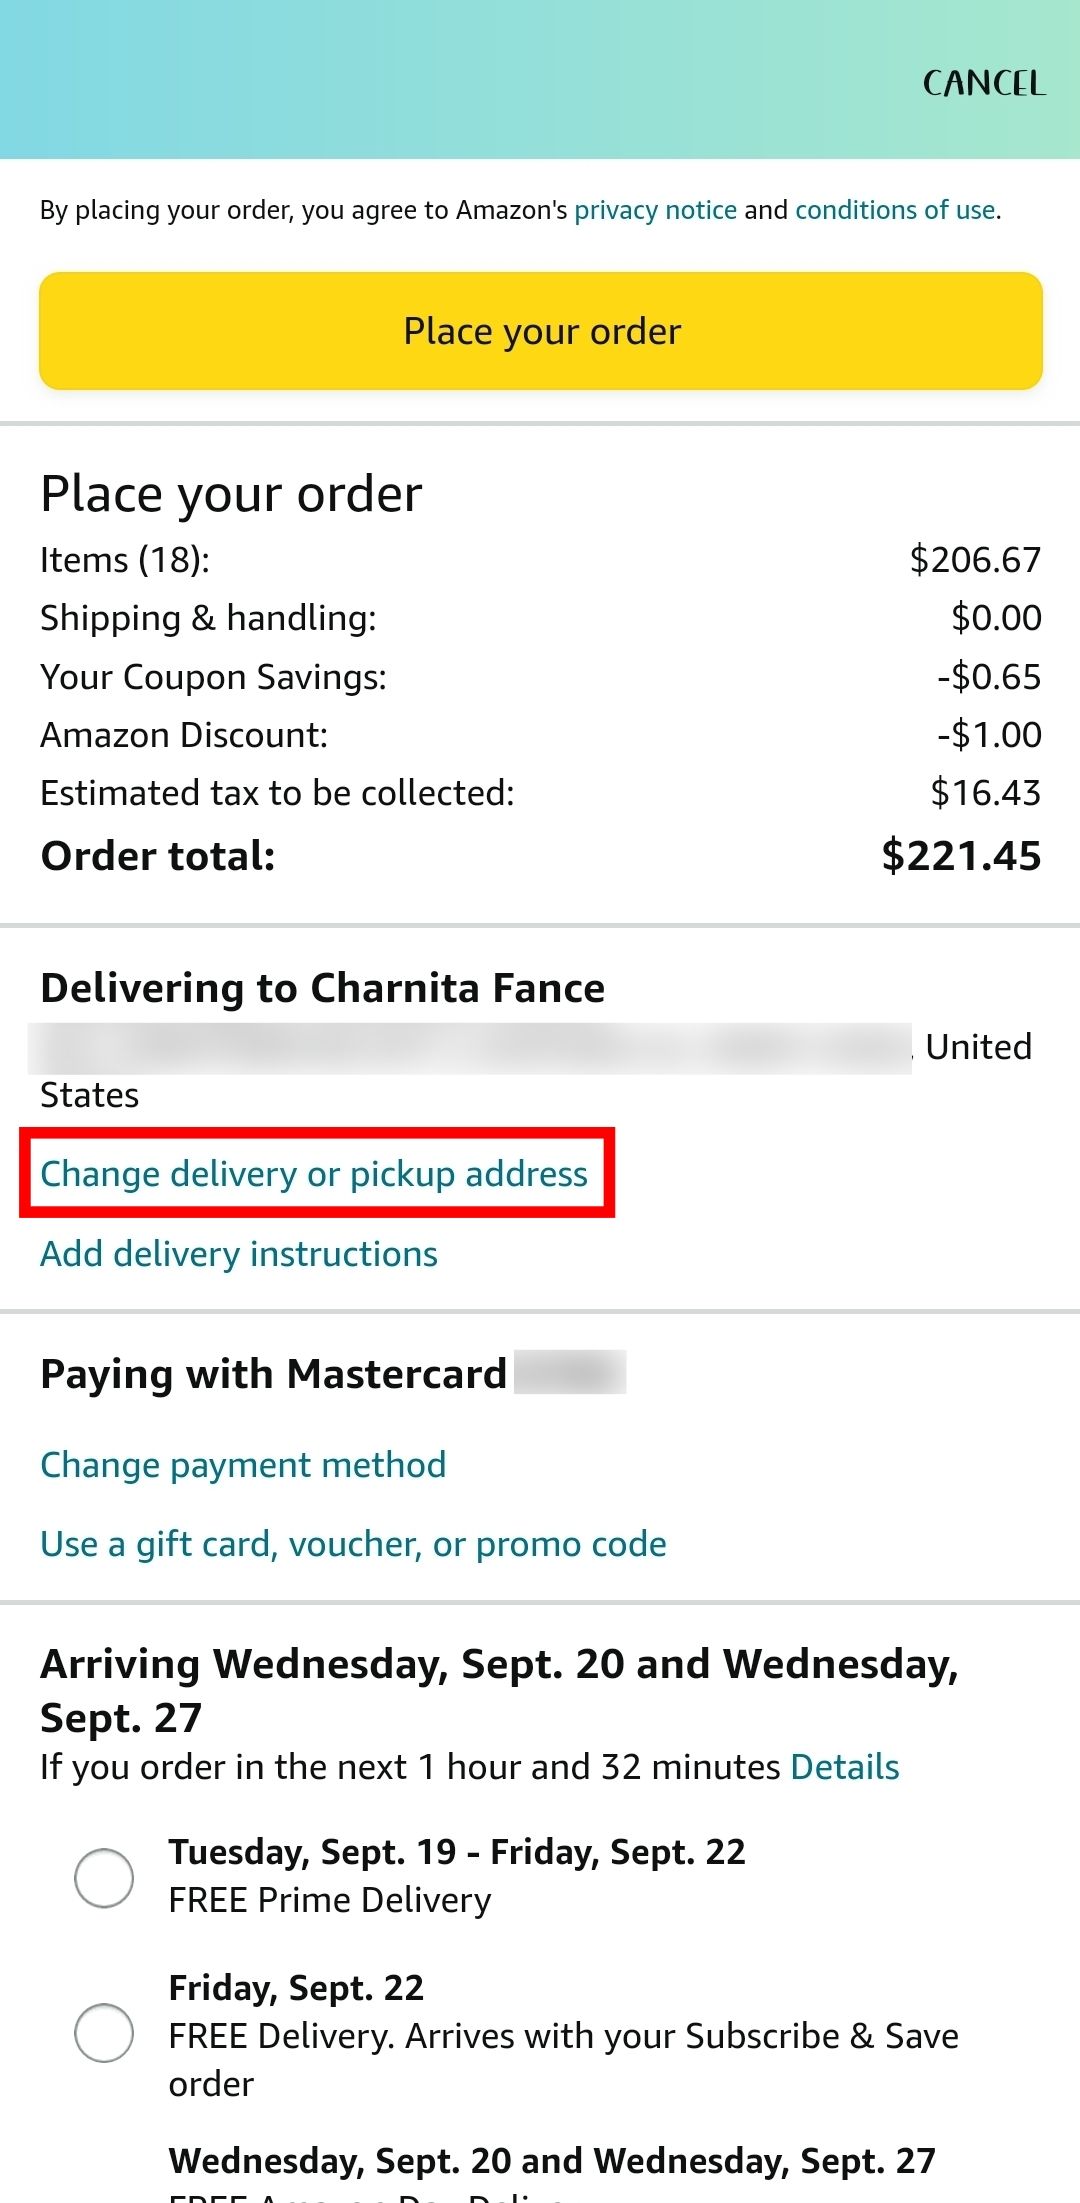 How to change the shipping address on an Amazon order